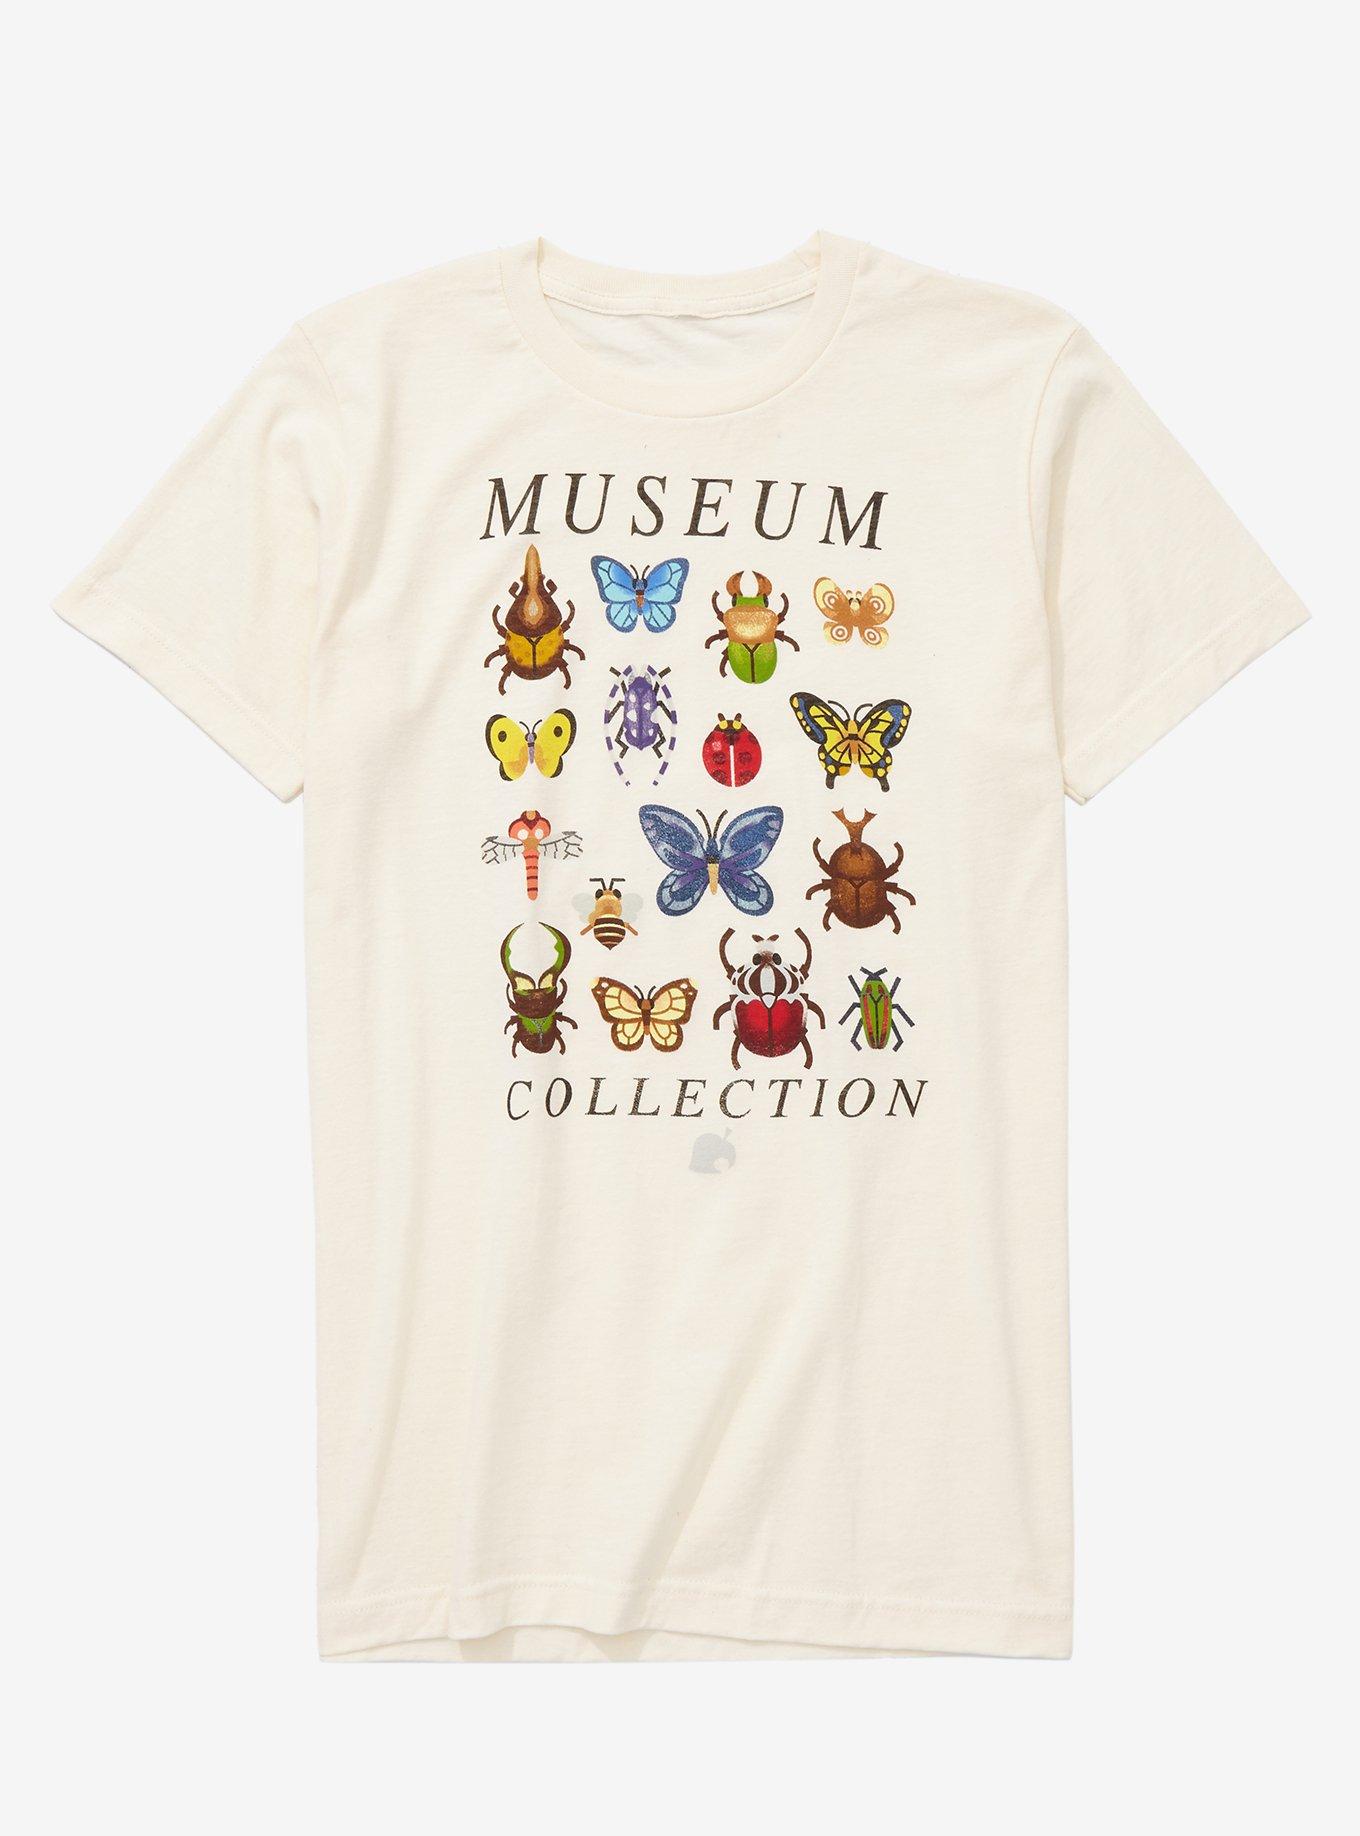 Nintendo Animal Crossing Museum Collection Women's  T-Shirt, OFF WHITE, hi-res